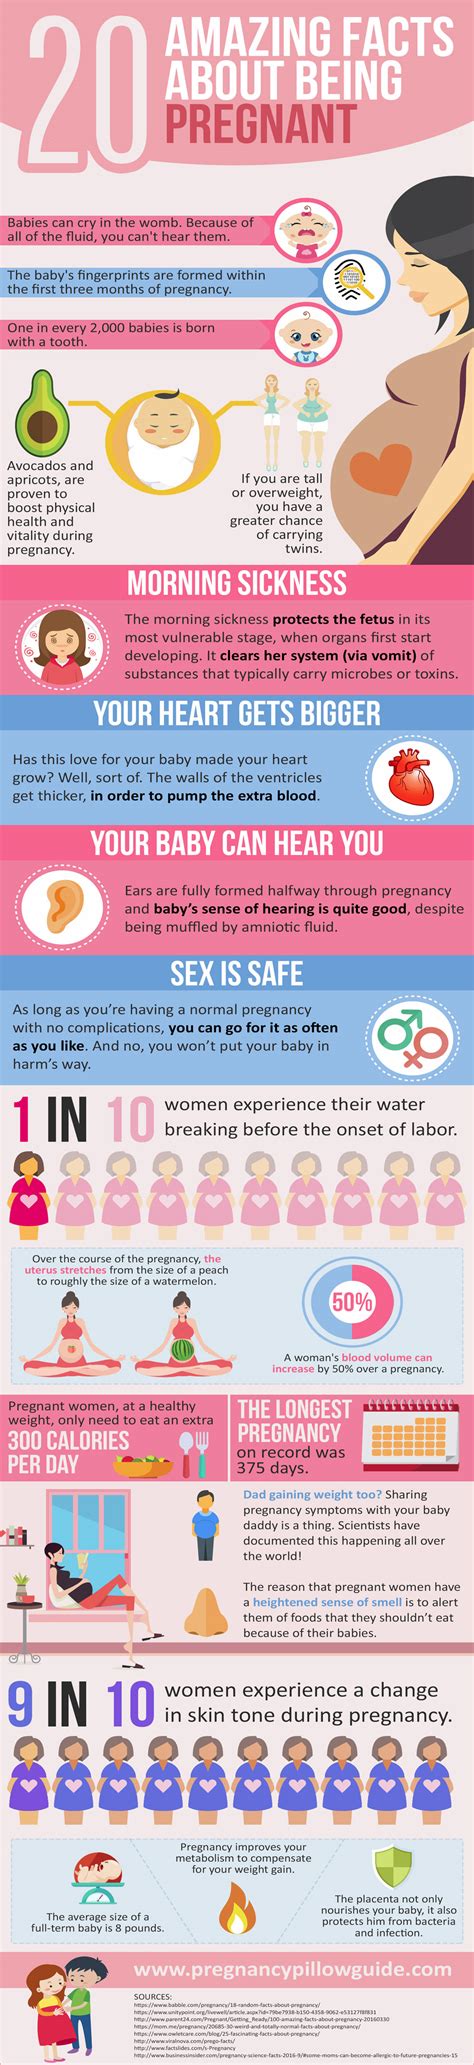 20 Amazing Facts About Being Pregnant Infographic